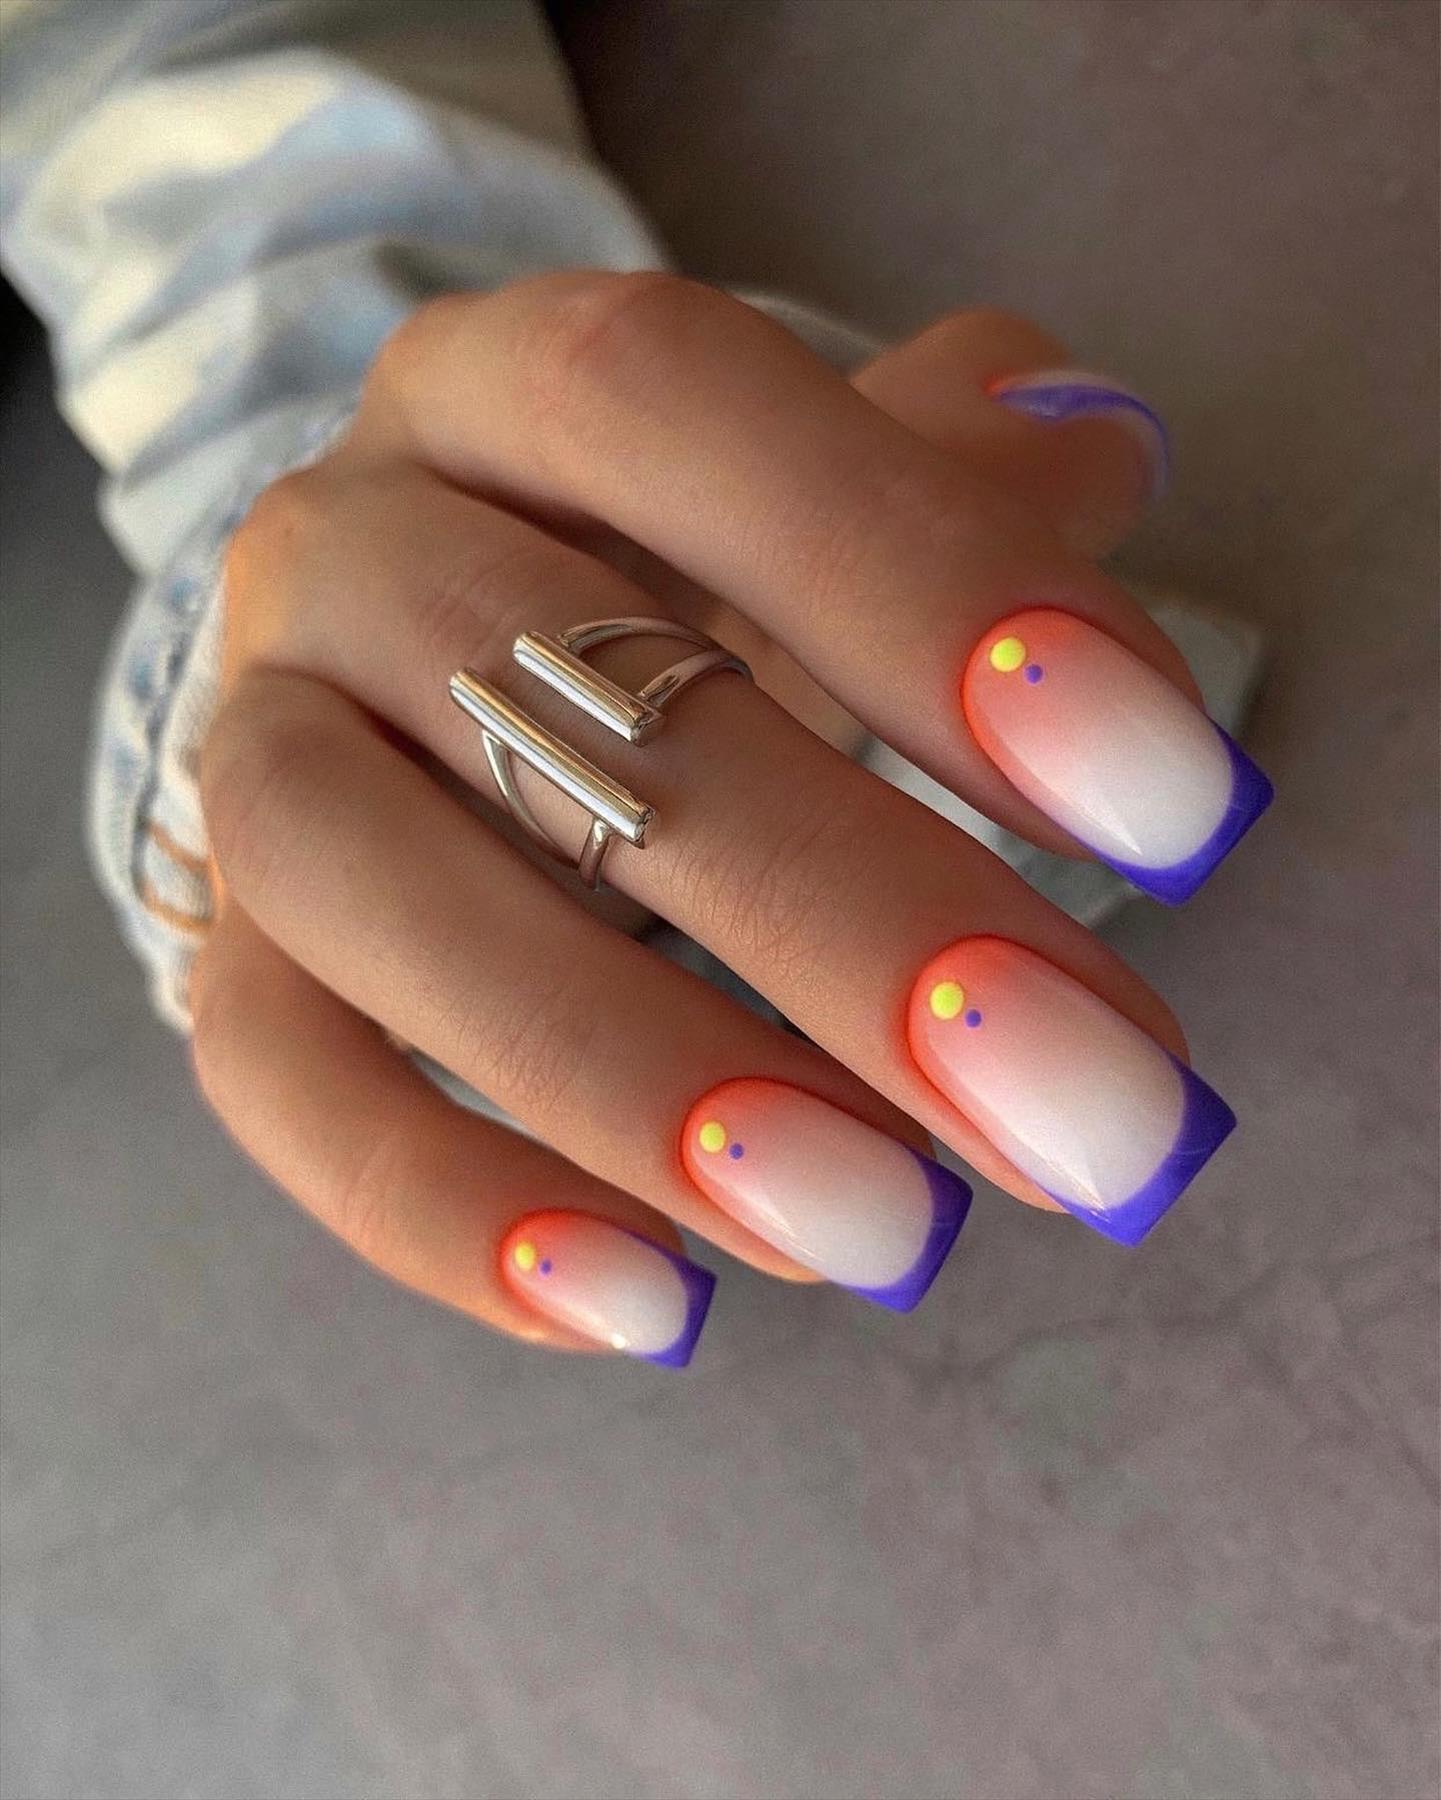 Adorable Short Blue Nails Ideas for Cooler Vibes in 2022!